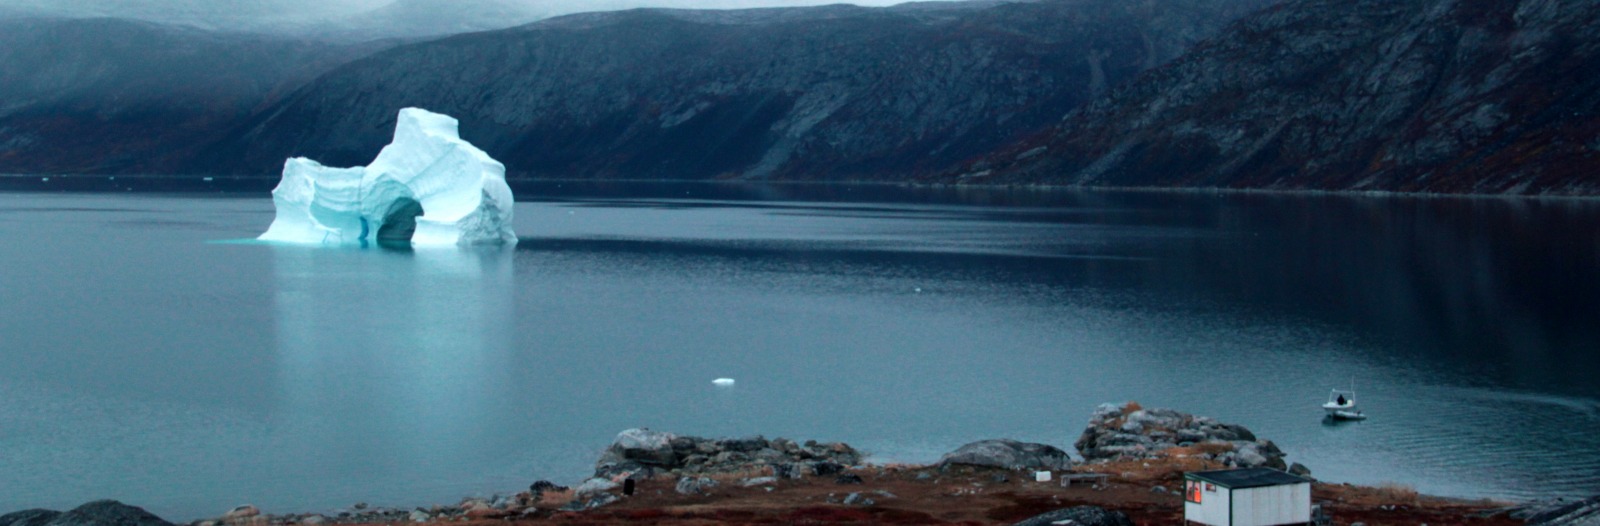 Lone iceberg in a sea of water near shore with a shack in the foreground